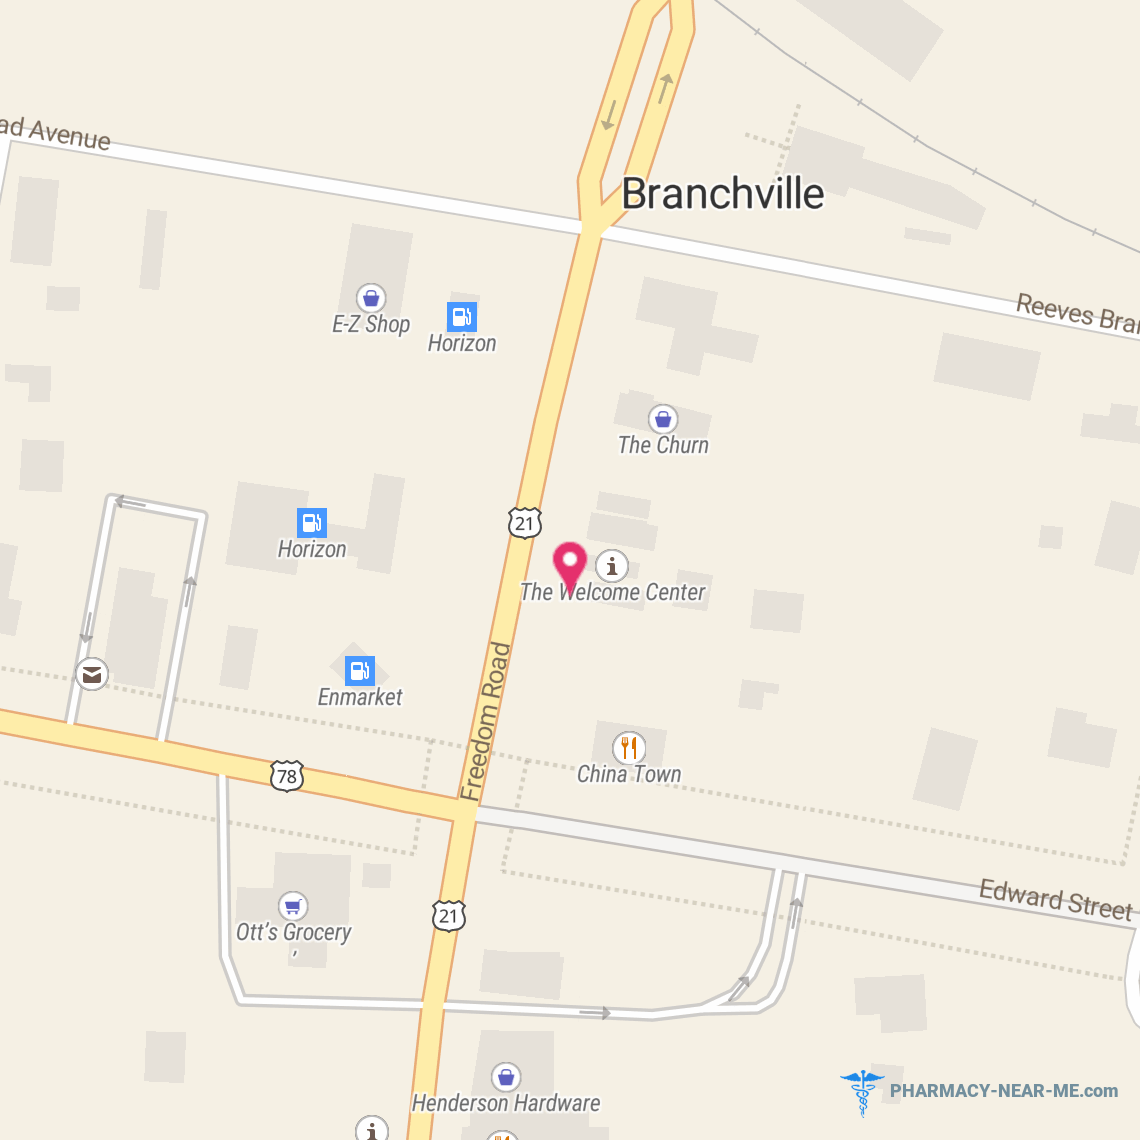 BRANCHVILLE PHARMACY - Pharmacy Hours, Phone, Reviews & Information: 7615 Freedom Road, Branchville, South Carolina 29432, United States